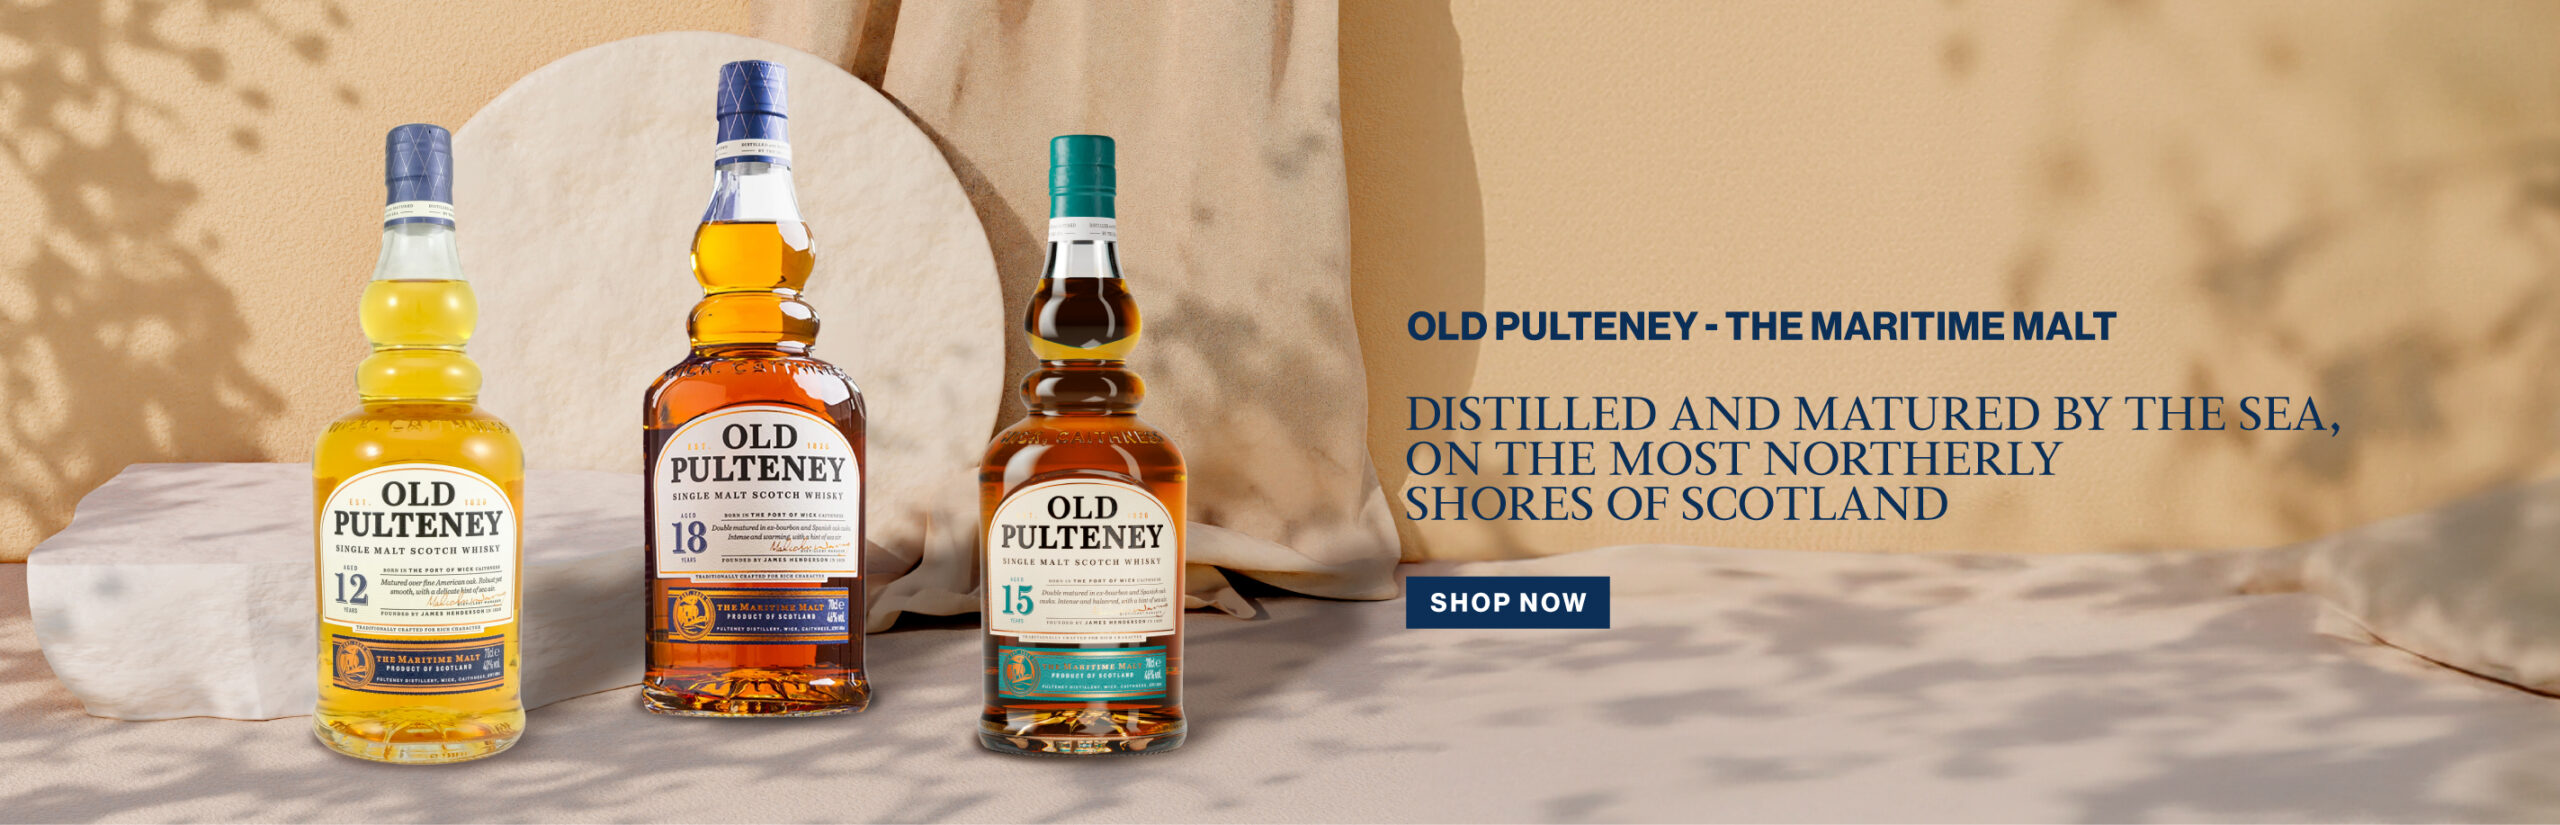 OLD PULTENEY-1366 × 440